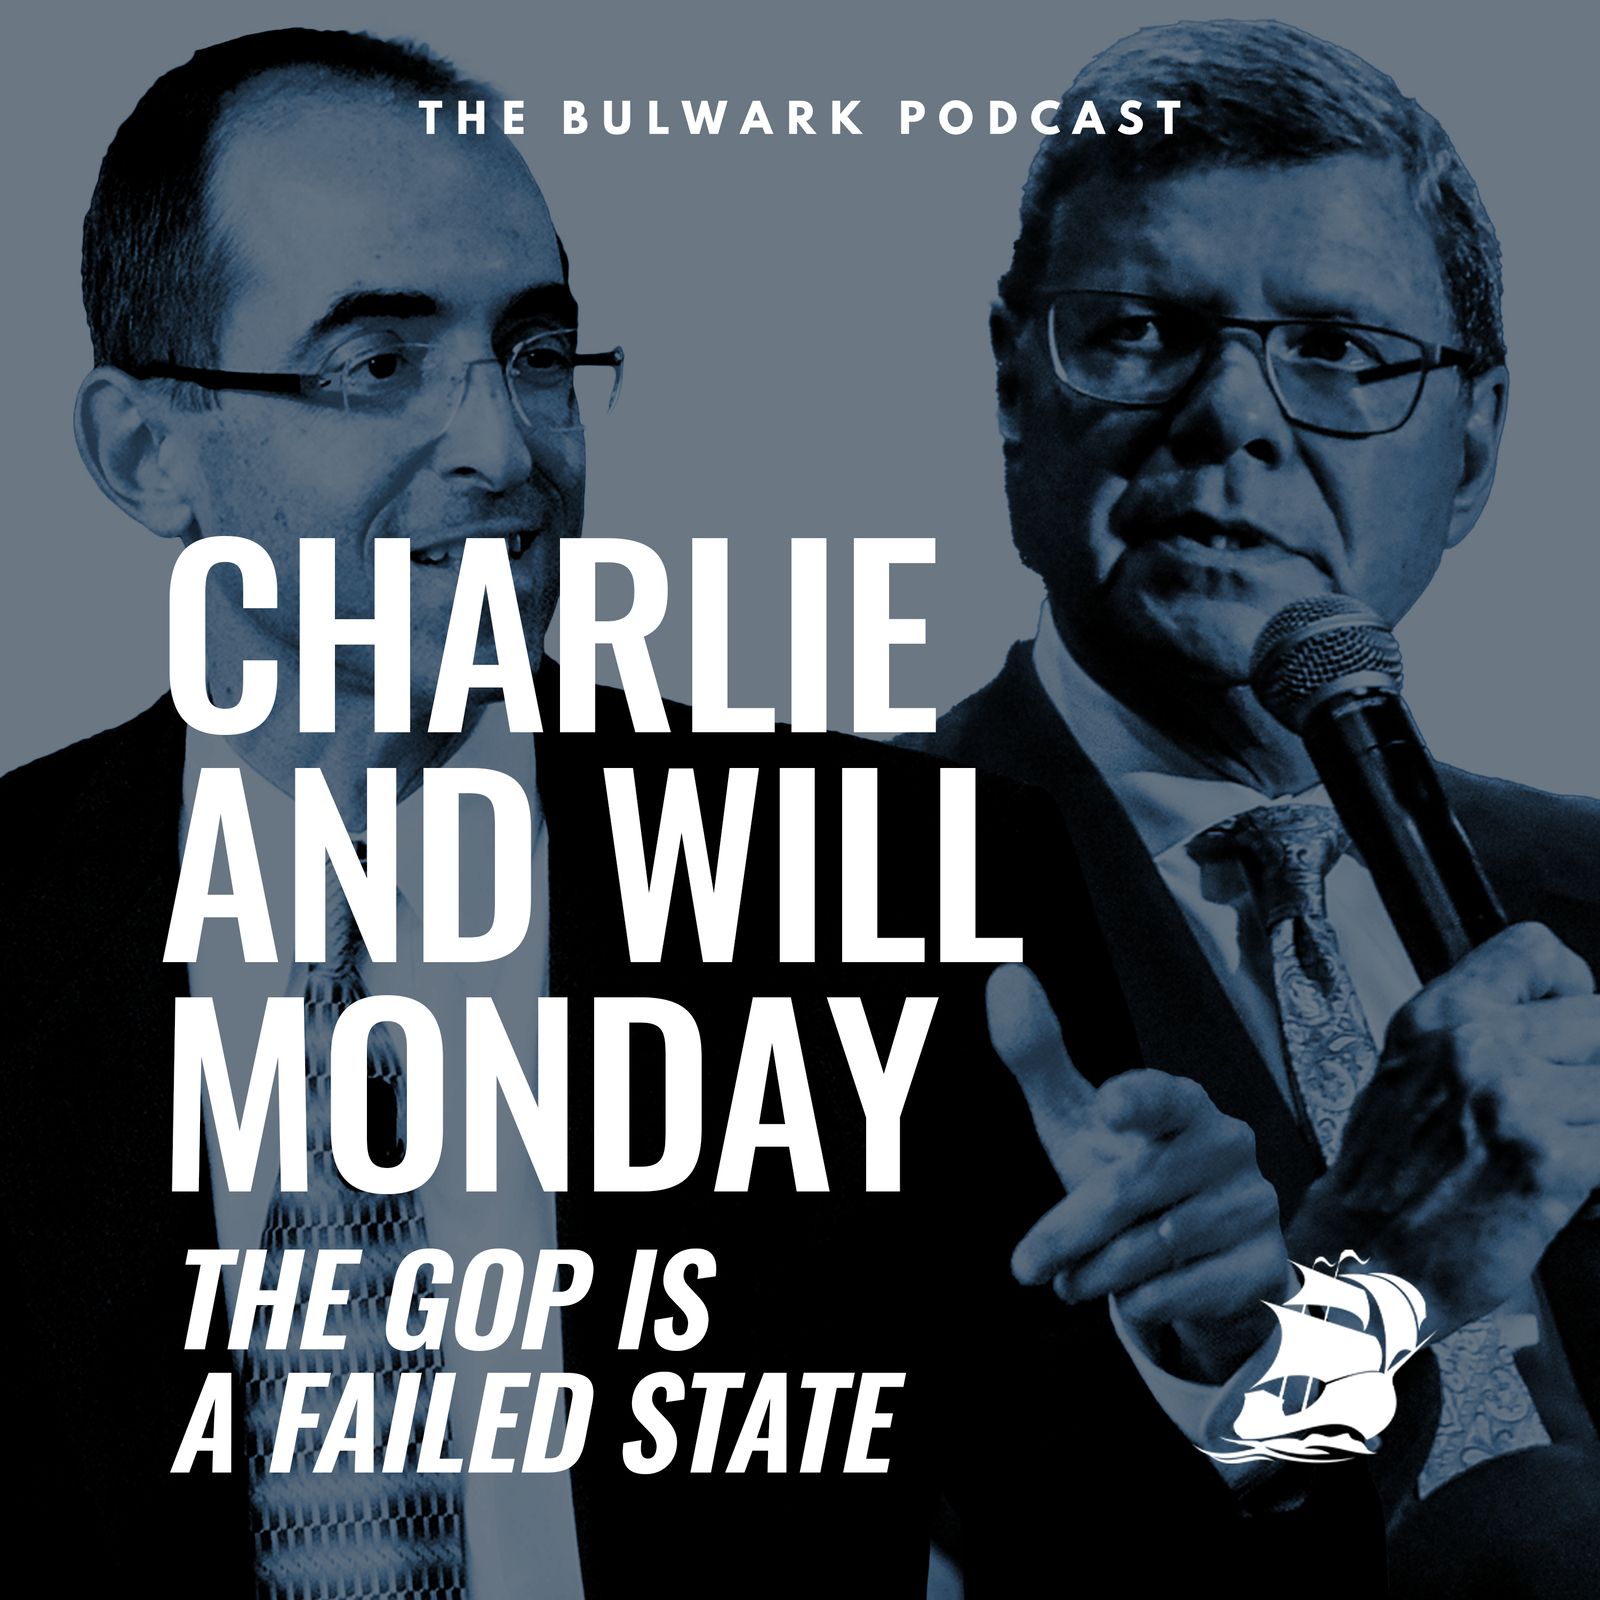 The GOP Is a Failed State by The Bulwark Podcast